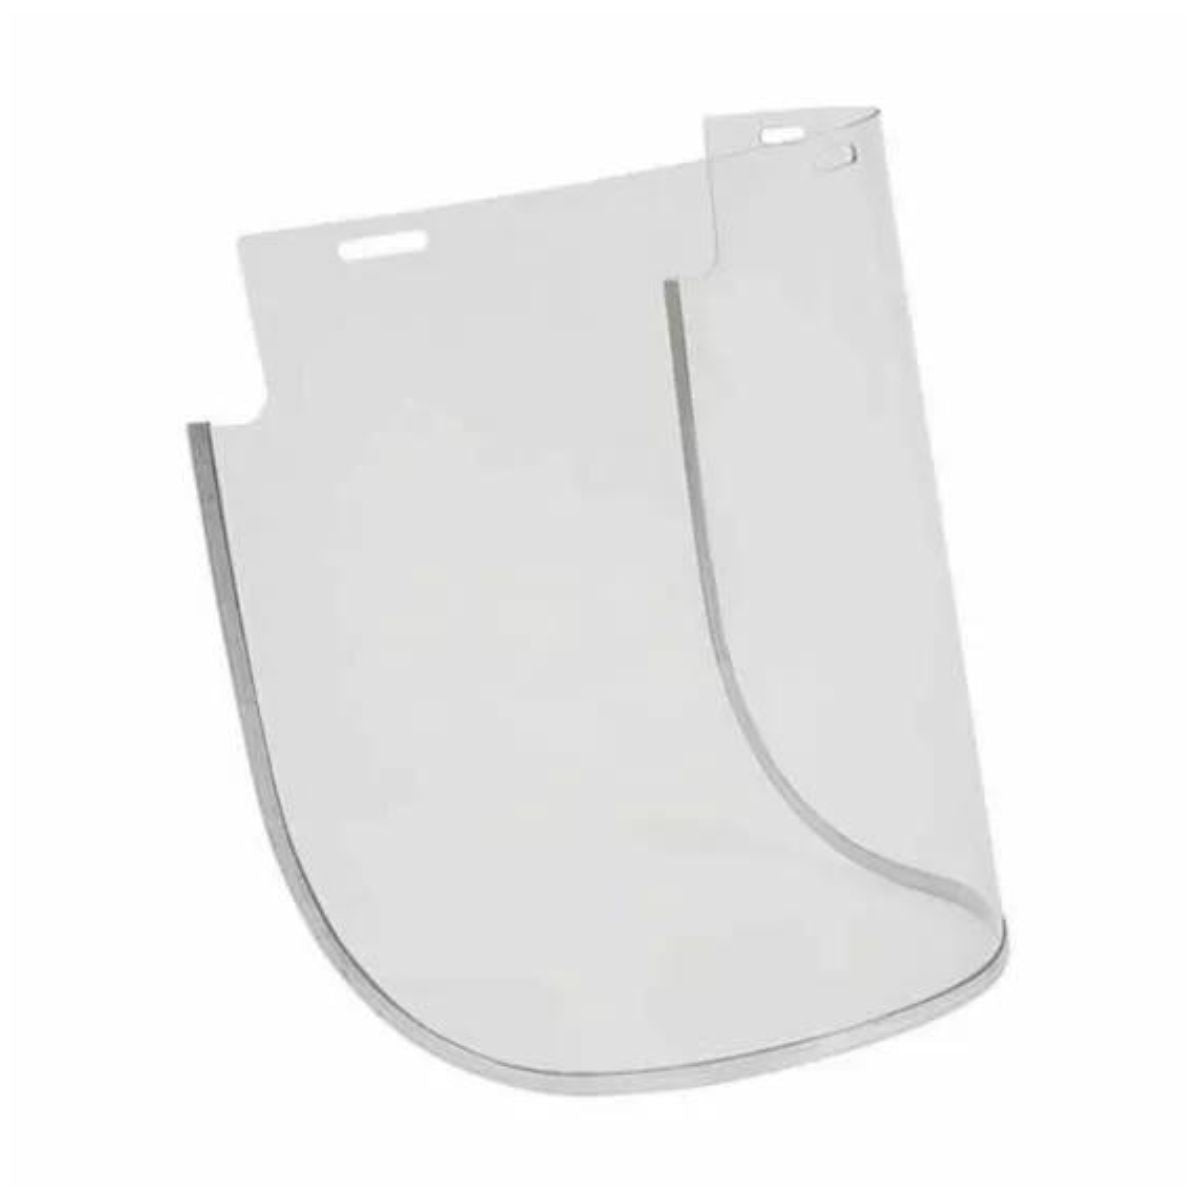 3M™ Unisafe Thermotuff+ Clear Visor Replacement VV882